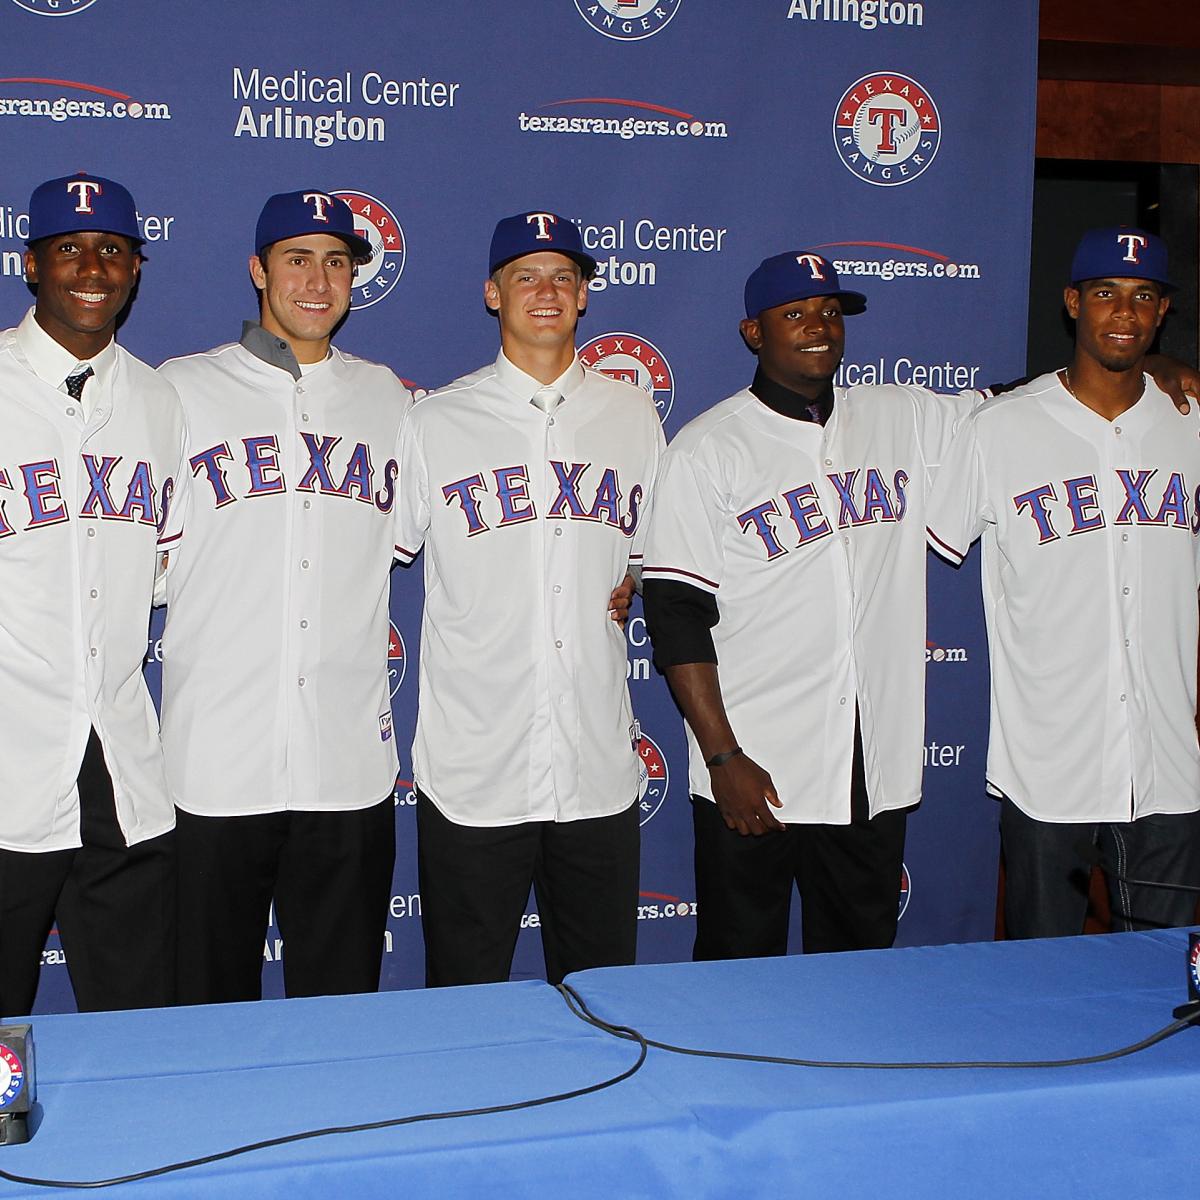 Texas Rangers MLB Draft Results Scouting Profiles for 2013 Picks